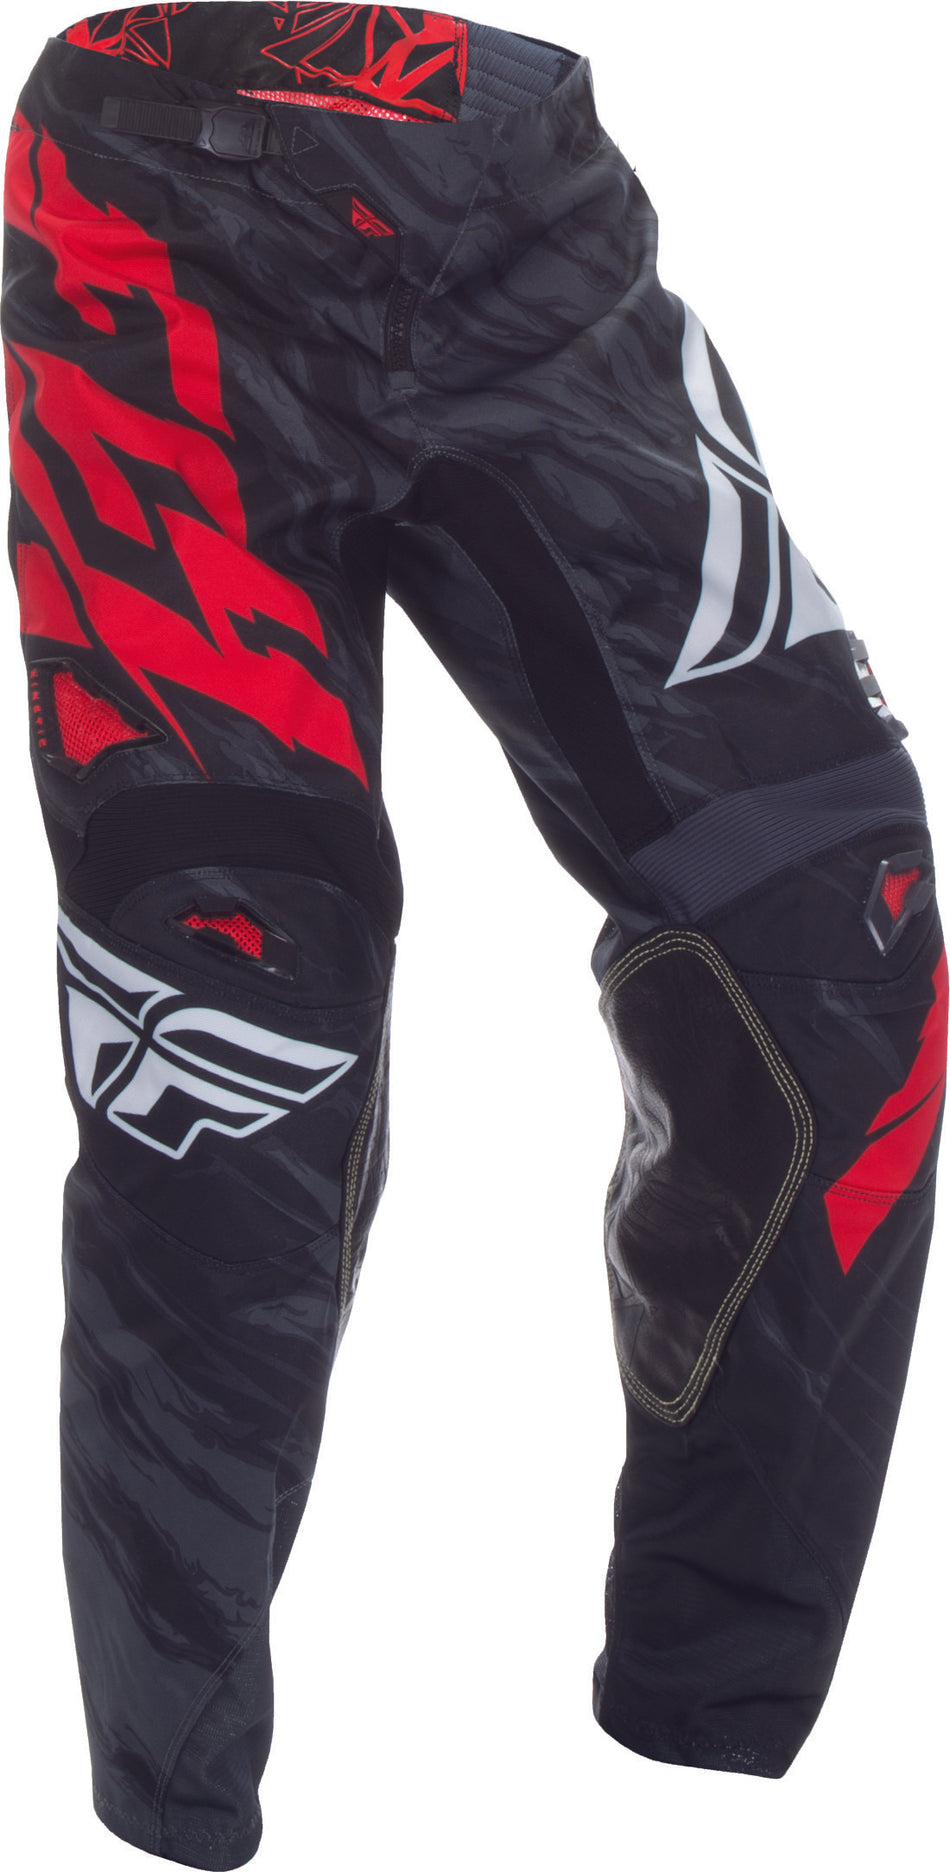 FLY RACING Kinetic Relapse Pant Black/Red Sz 32 370-43032